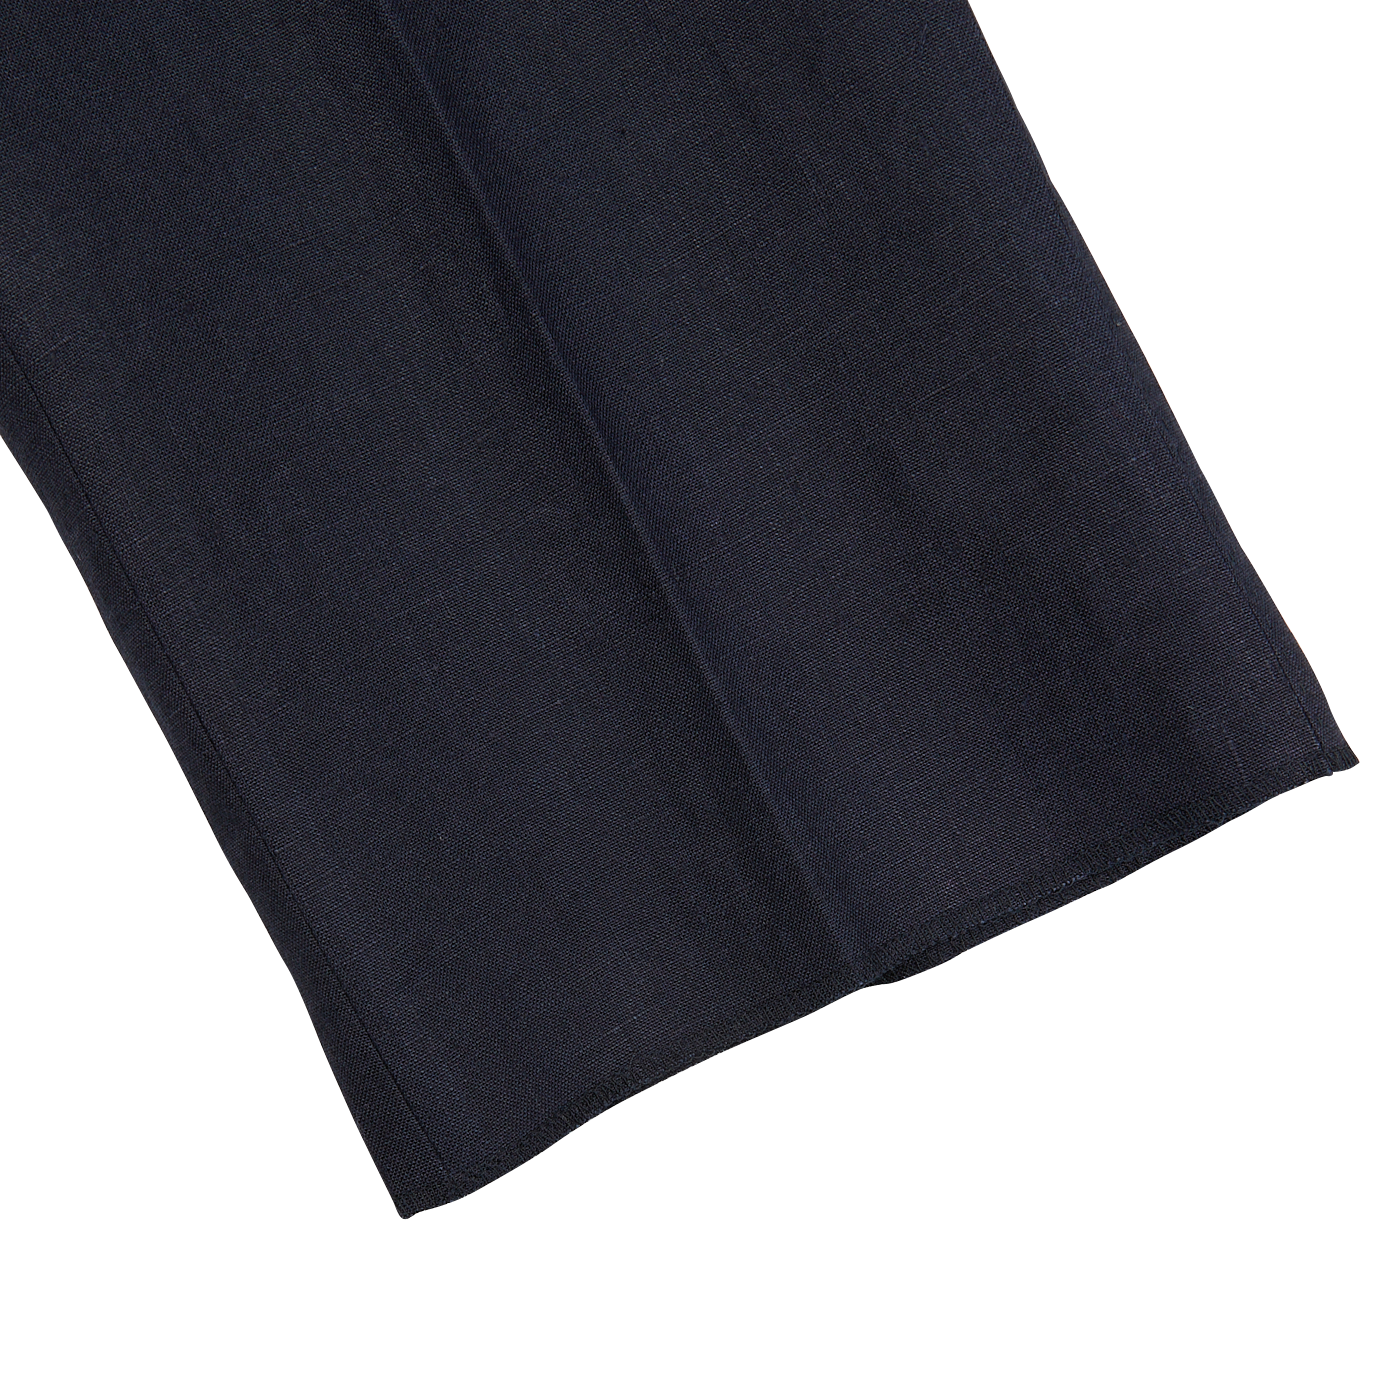 A close up of Navy Blue Pure Linen Pleated Trousers in dark blue by Baltzar Sartorial.